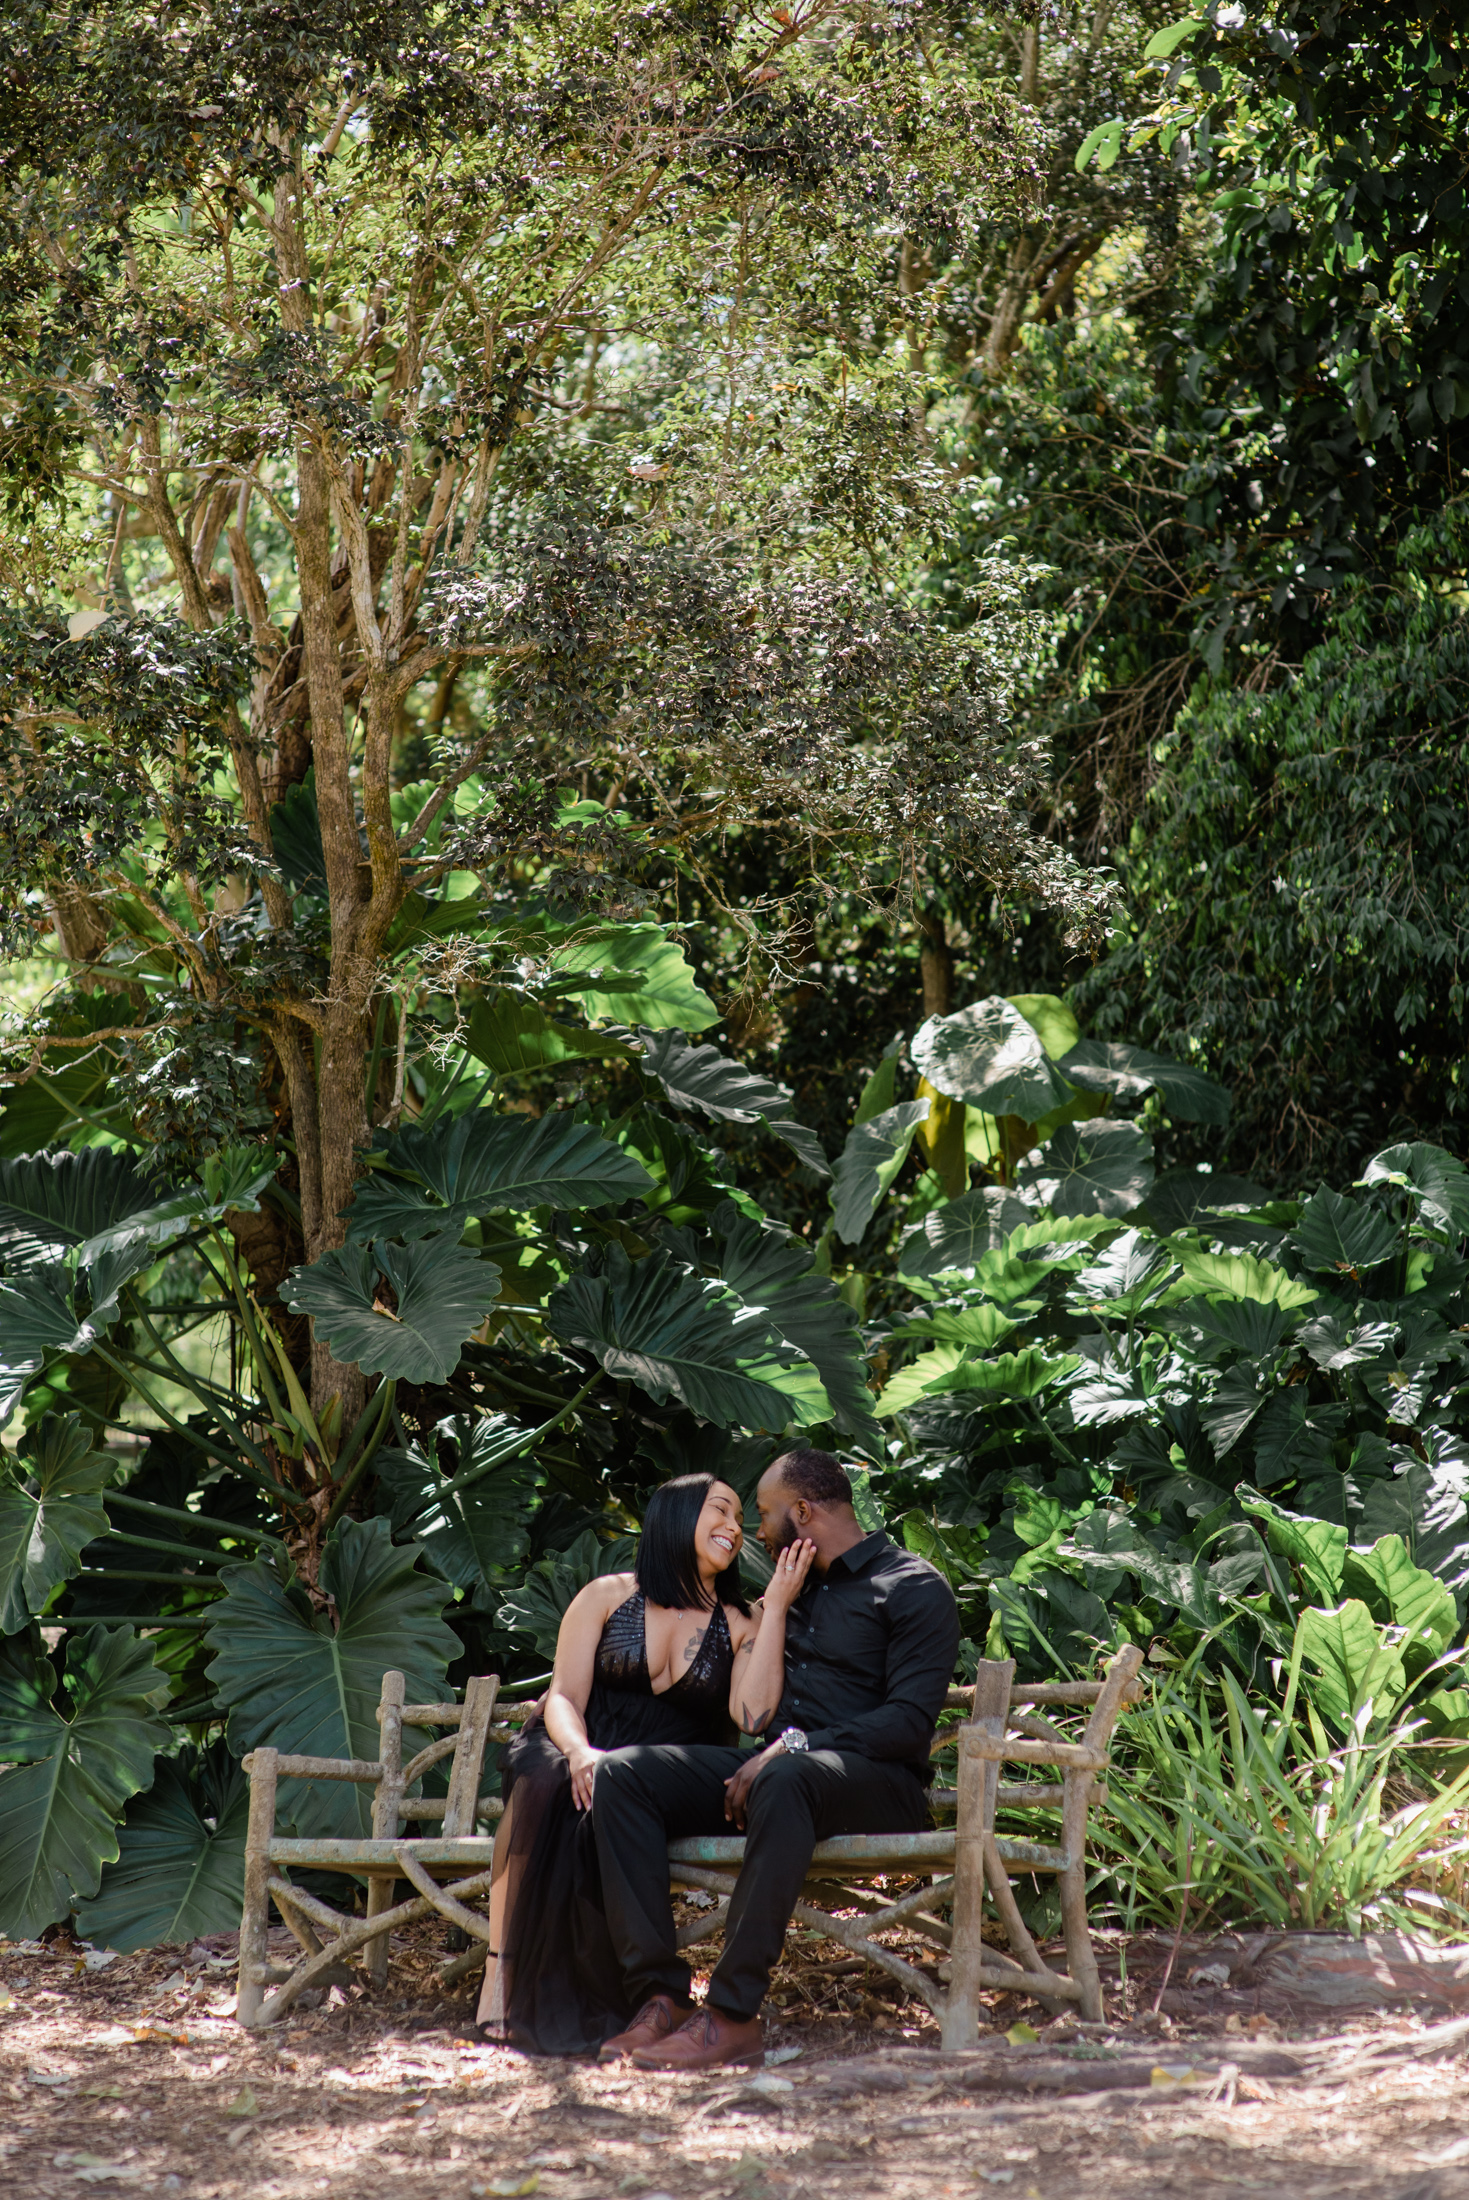 Engagement photo session at Fairchild tropical gardens in miami florida.